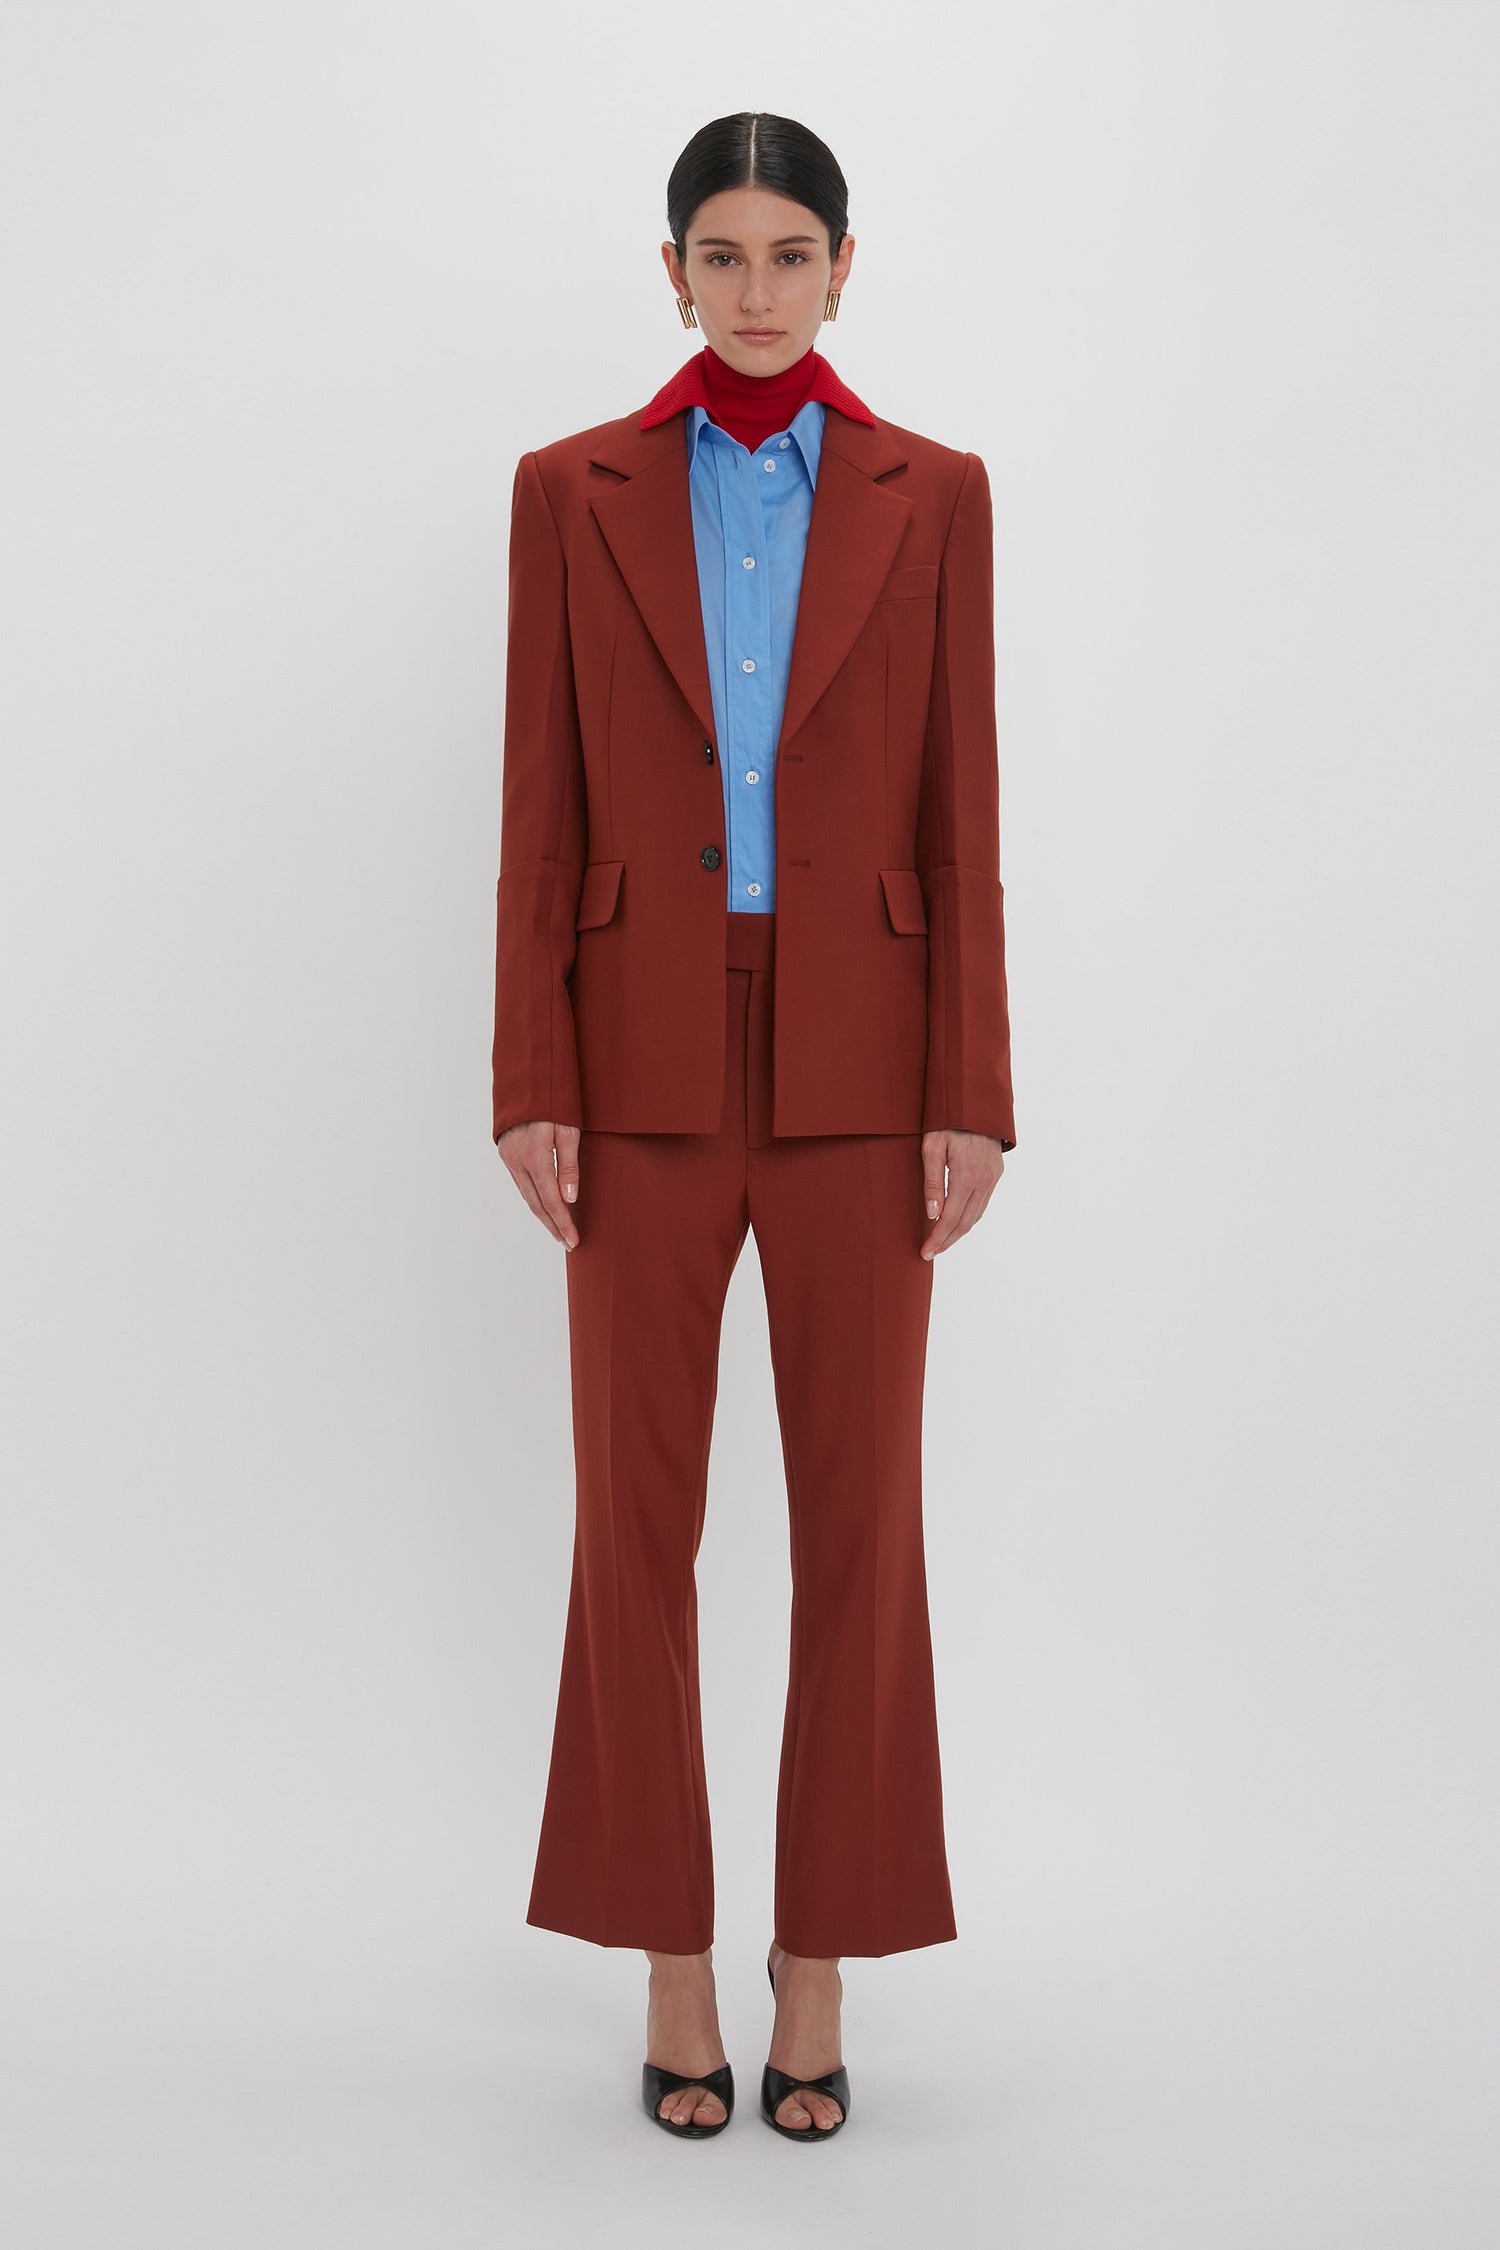 A person stands against a plain background, wearing the Sleeve Detail Patch Pocket Jacket In Russet from Victoria Beckham, paired with a blue shirt and red neck scarf. They are also wearing black open-toe heels.